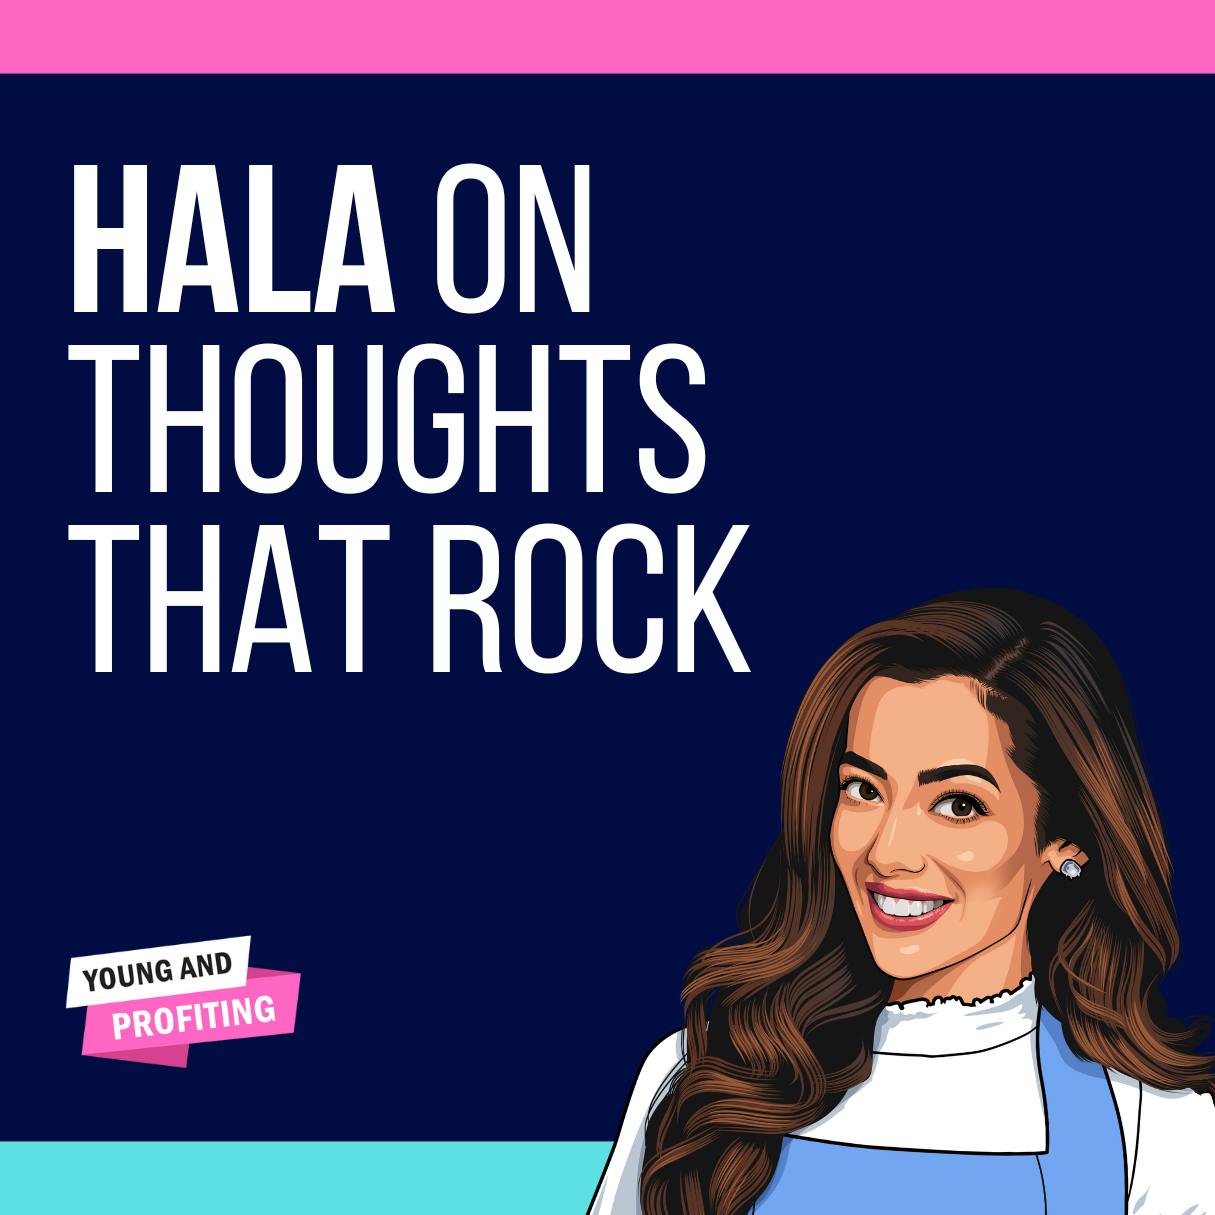  Hala Taha: How I Overcame My Limiting Beliefs and Built a Mindset of Abundance (Thoughts That Rock) by Hala Taha | YAP Media Network